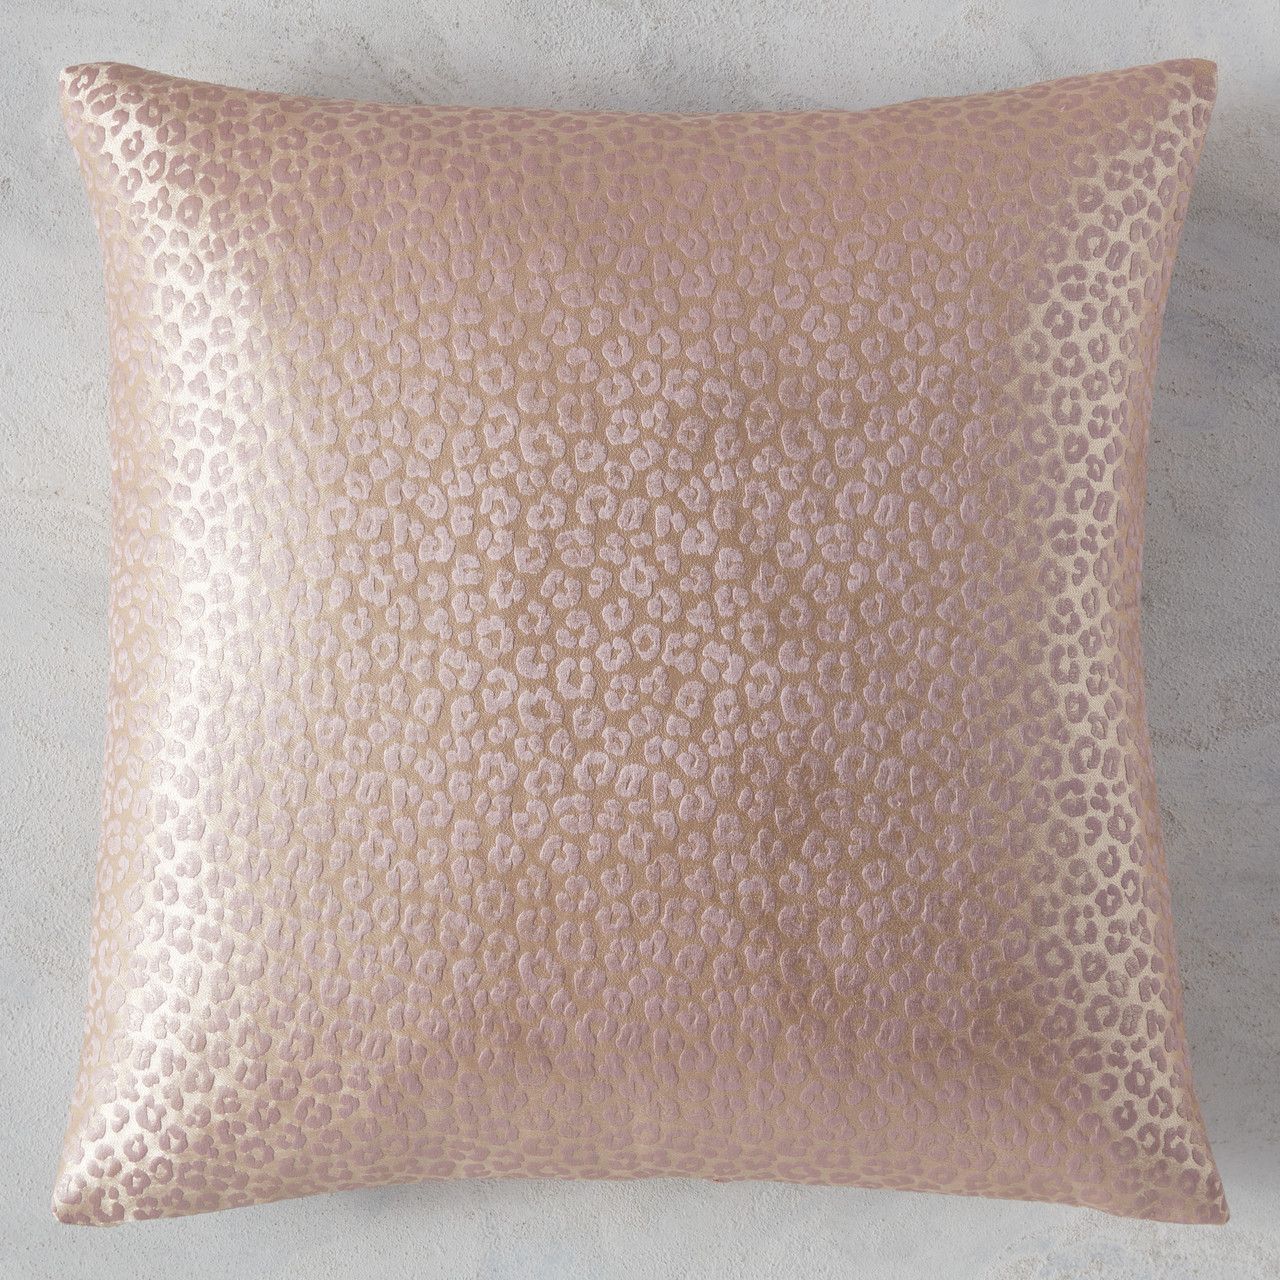 Indie Pillow Cover 22" | Z Gallerie